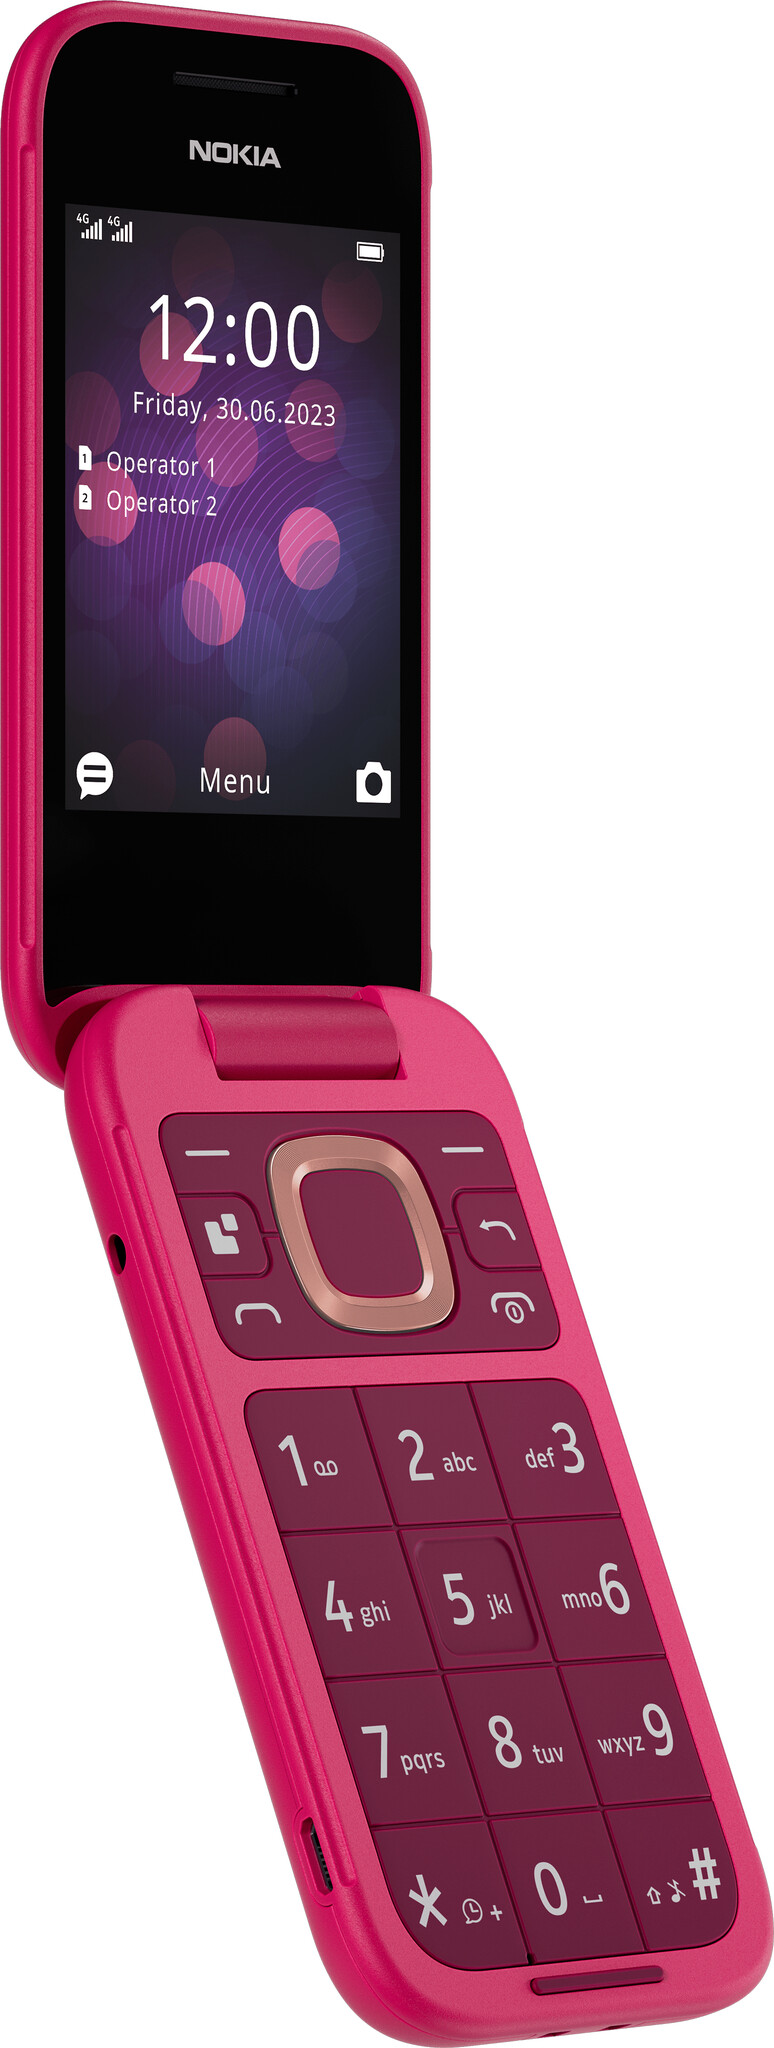 Nokia 2660 32GB Mobile Phone in Pop Pink (1GF011IPC1A04) #364119